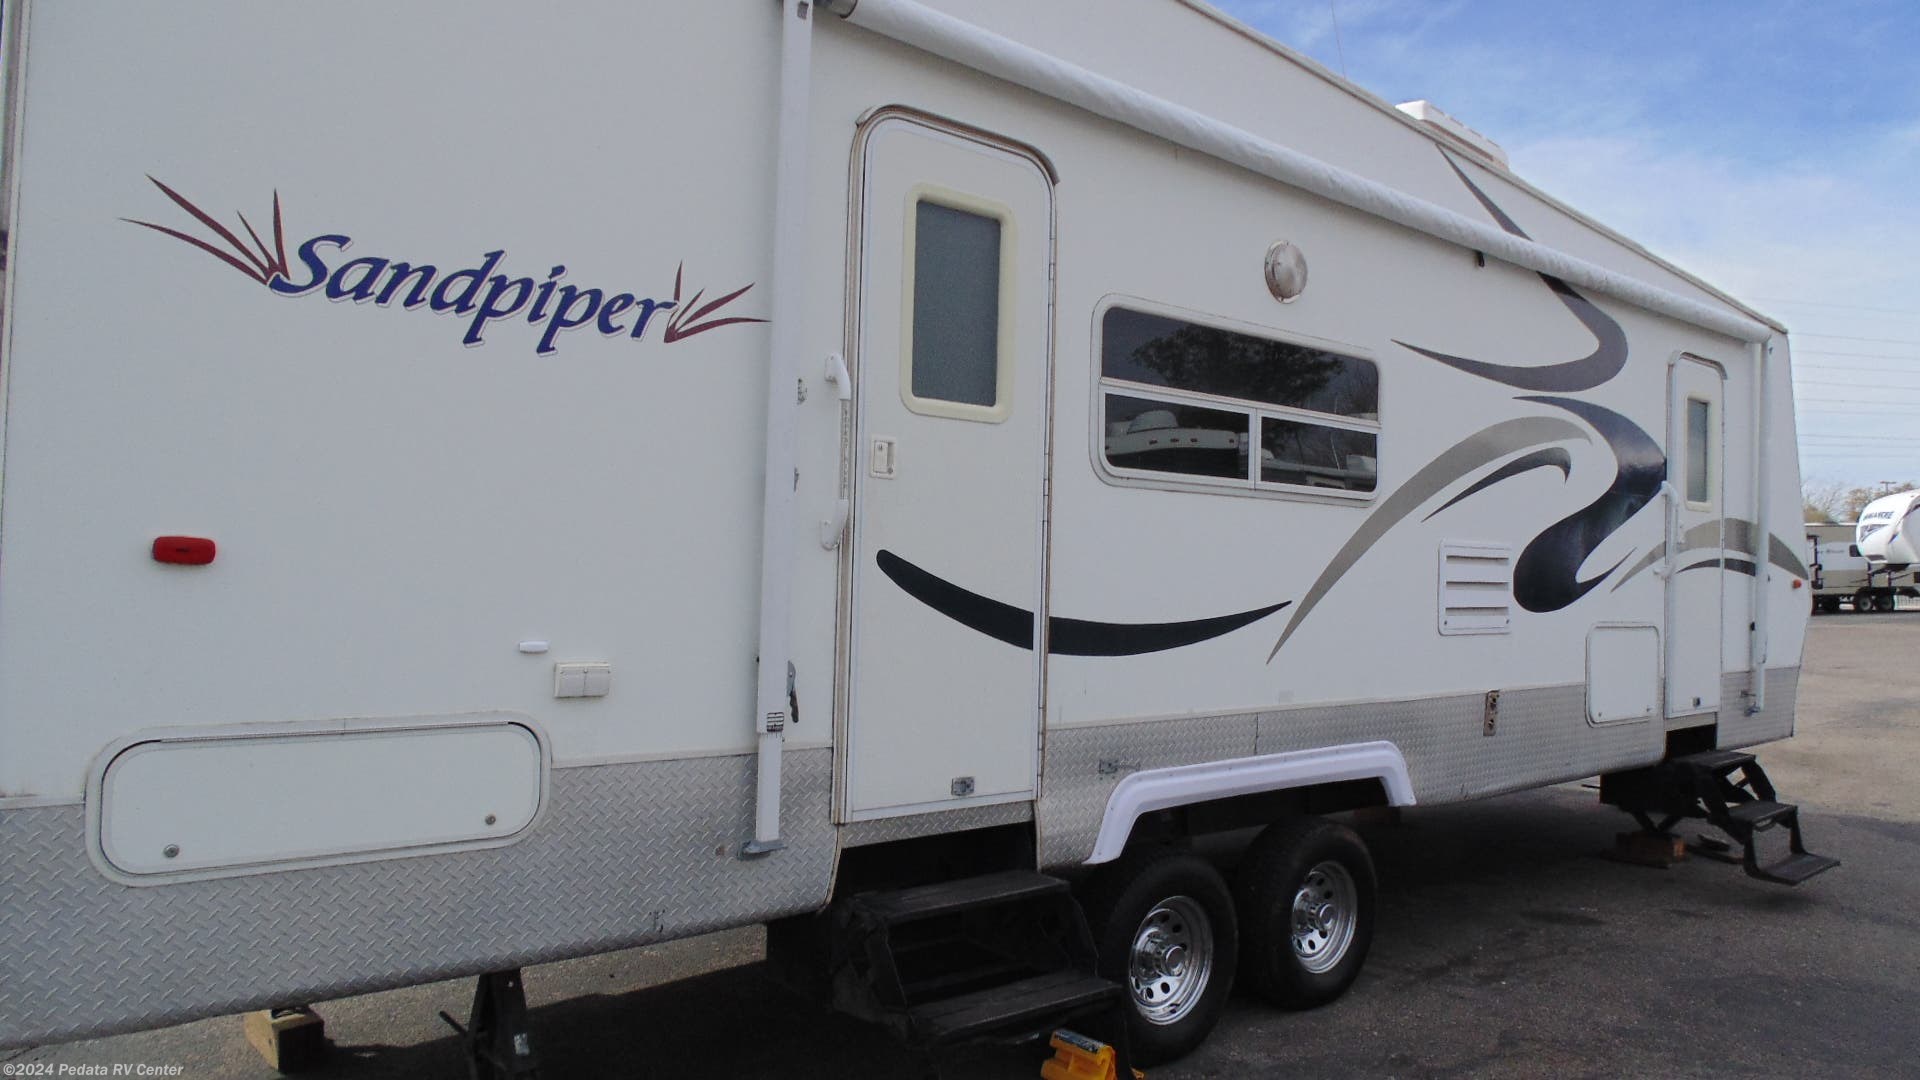 #12112 - Used 2004 Forest River Sandpiper 28SP Toy Hauler RV For Sale 2004 Forest River Sandpiper Toy Hauler